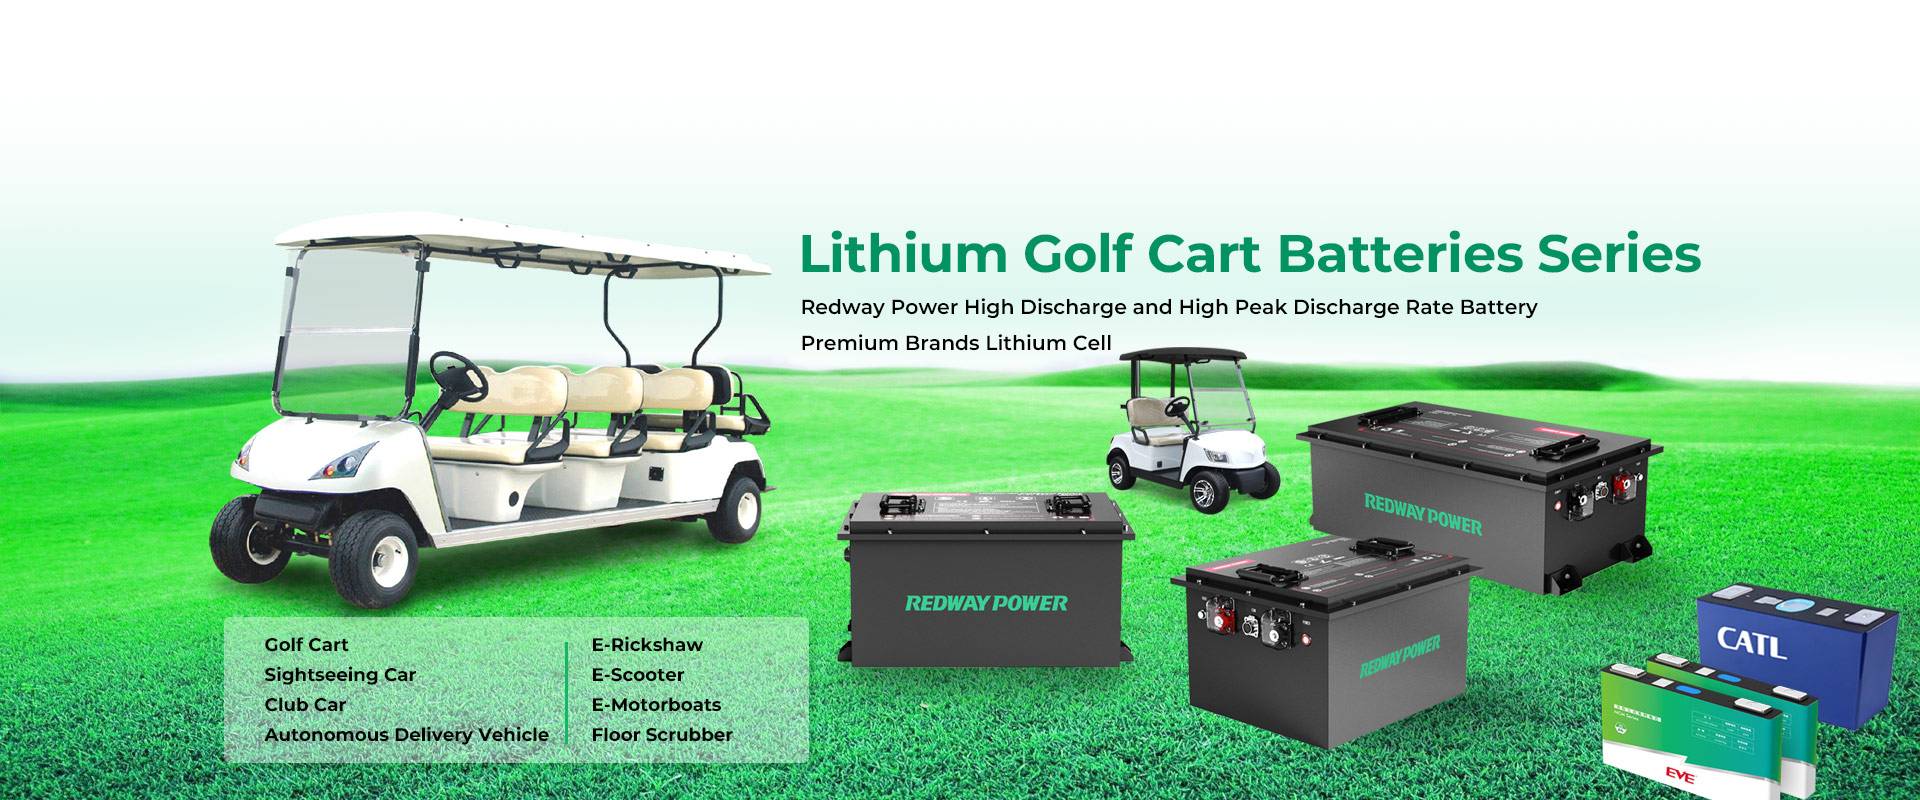 36v50ah 36v100ah 48v100ah 48v150ah 48v200ah 72v100ah 72v200ah 96v100ah lithium golf cart battery lifepo4 redway power factory